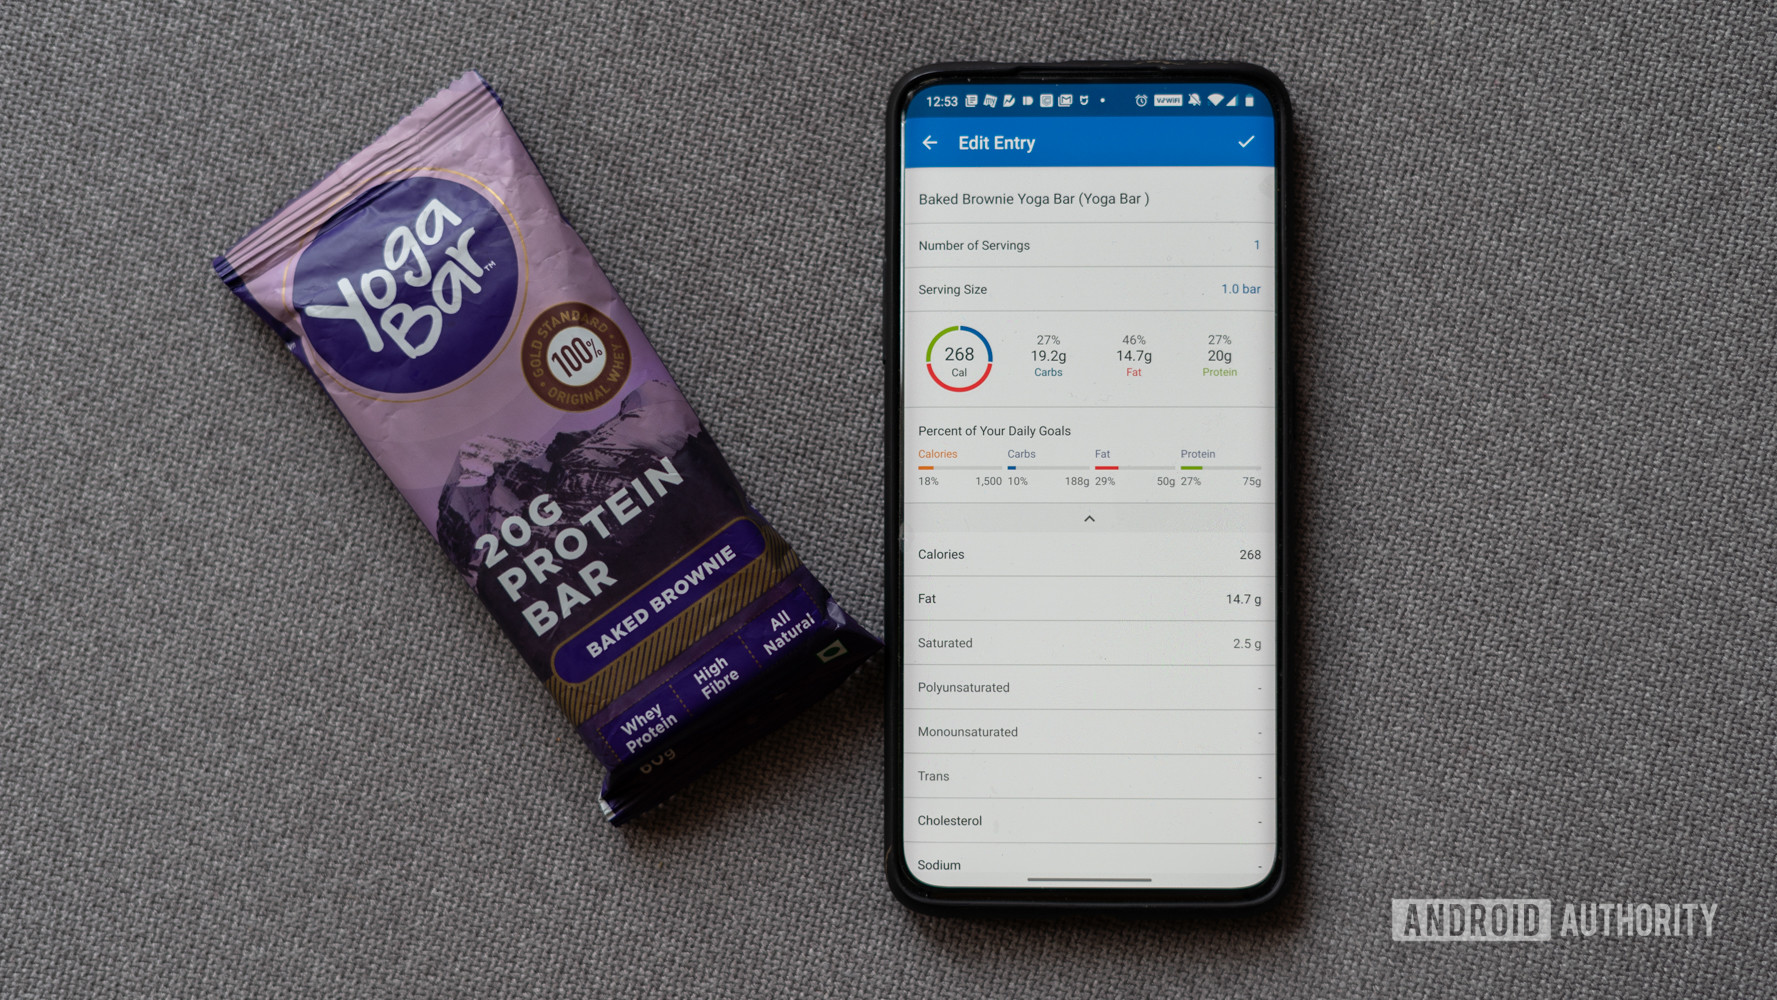 An iPhone displaying a user's calorie tracking data in the MyFitnessPal app rests on a linen surface next to a Yoga Bar protein bar.